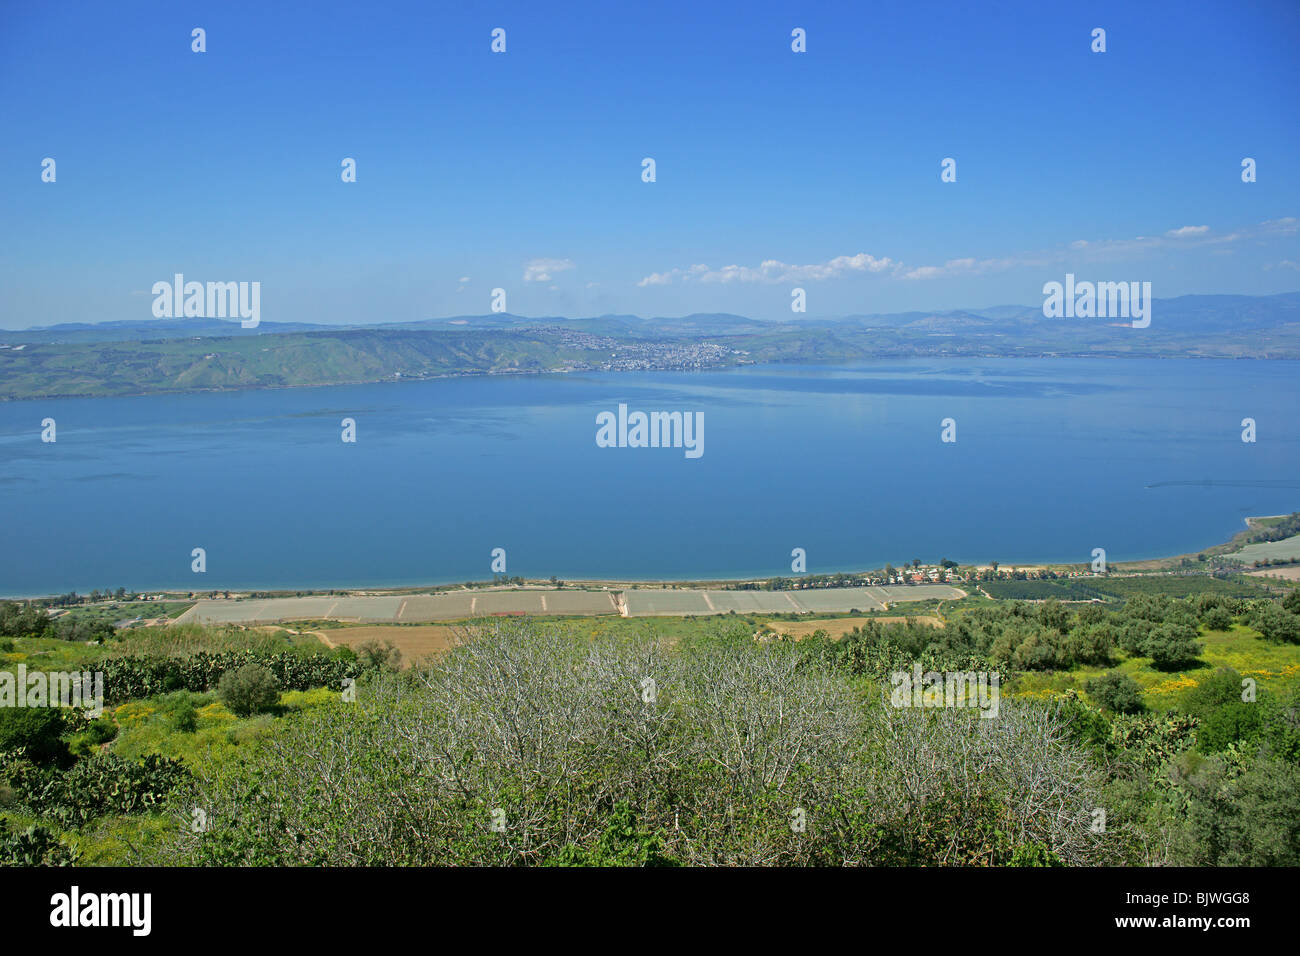 Sea of Galilee from above. Stock Photo